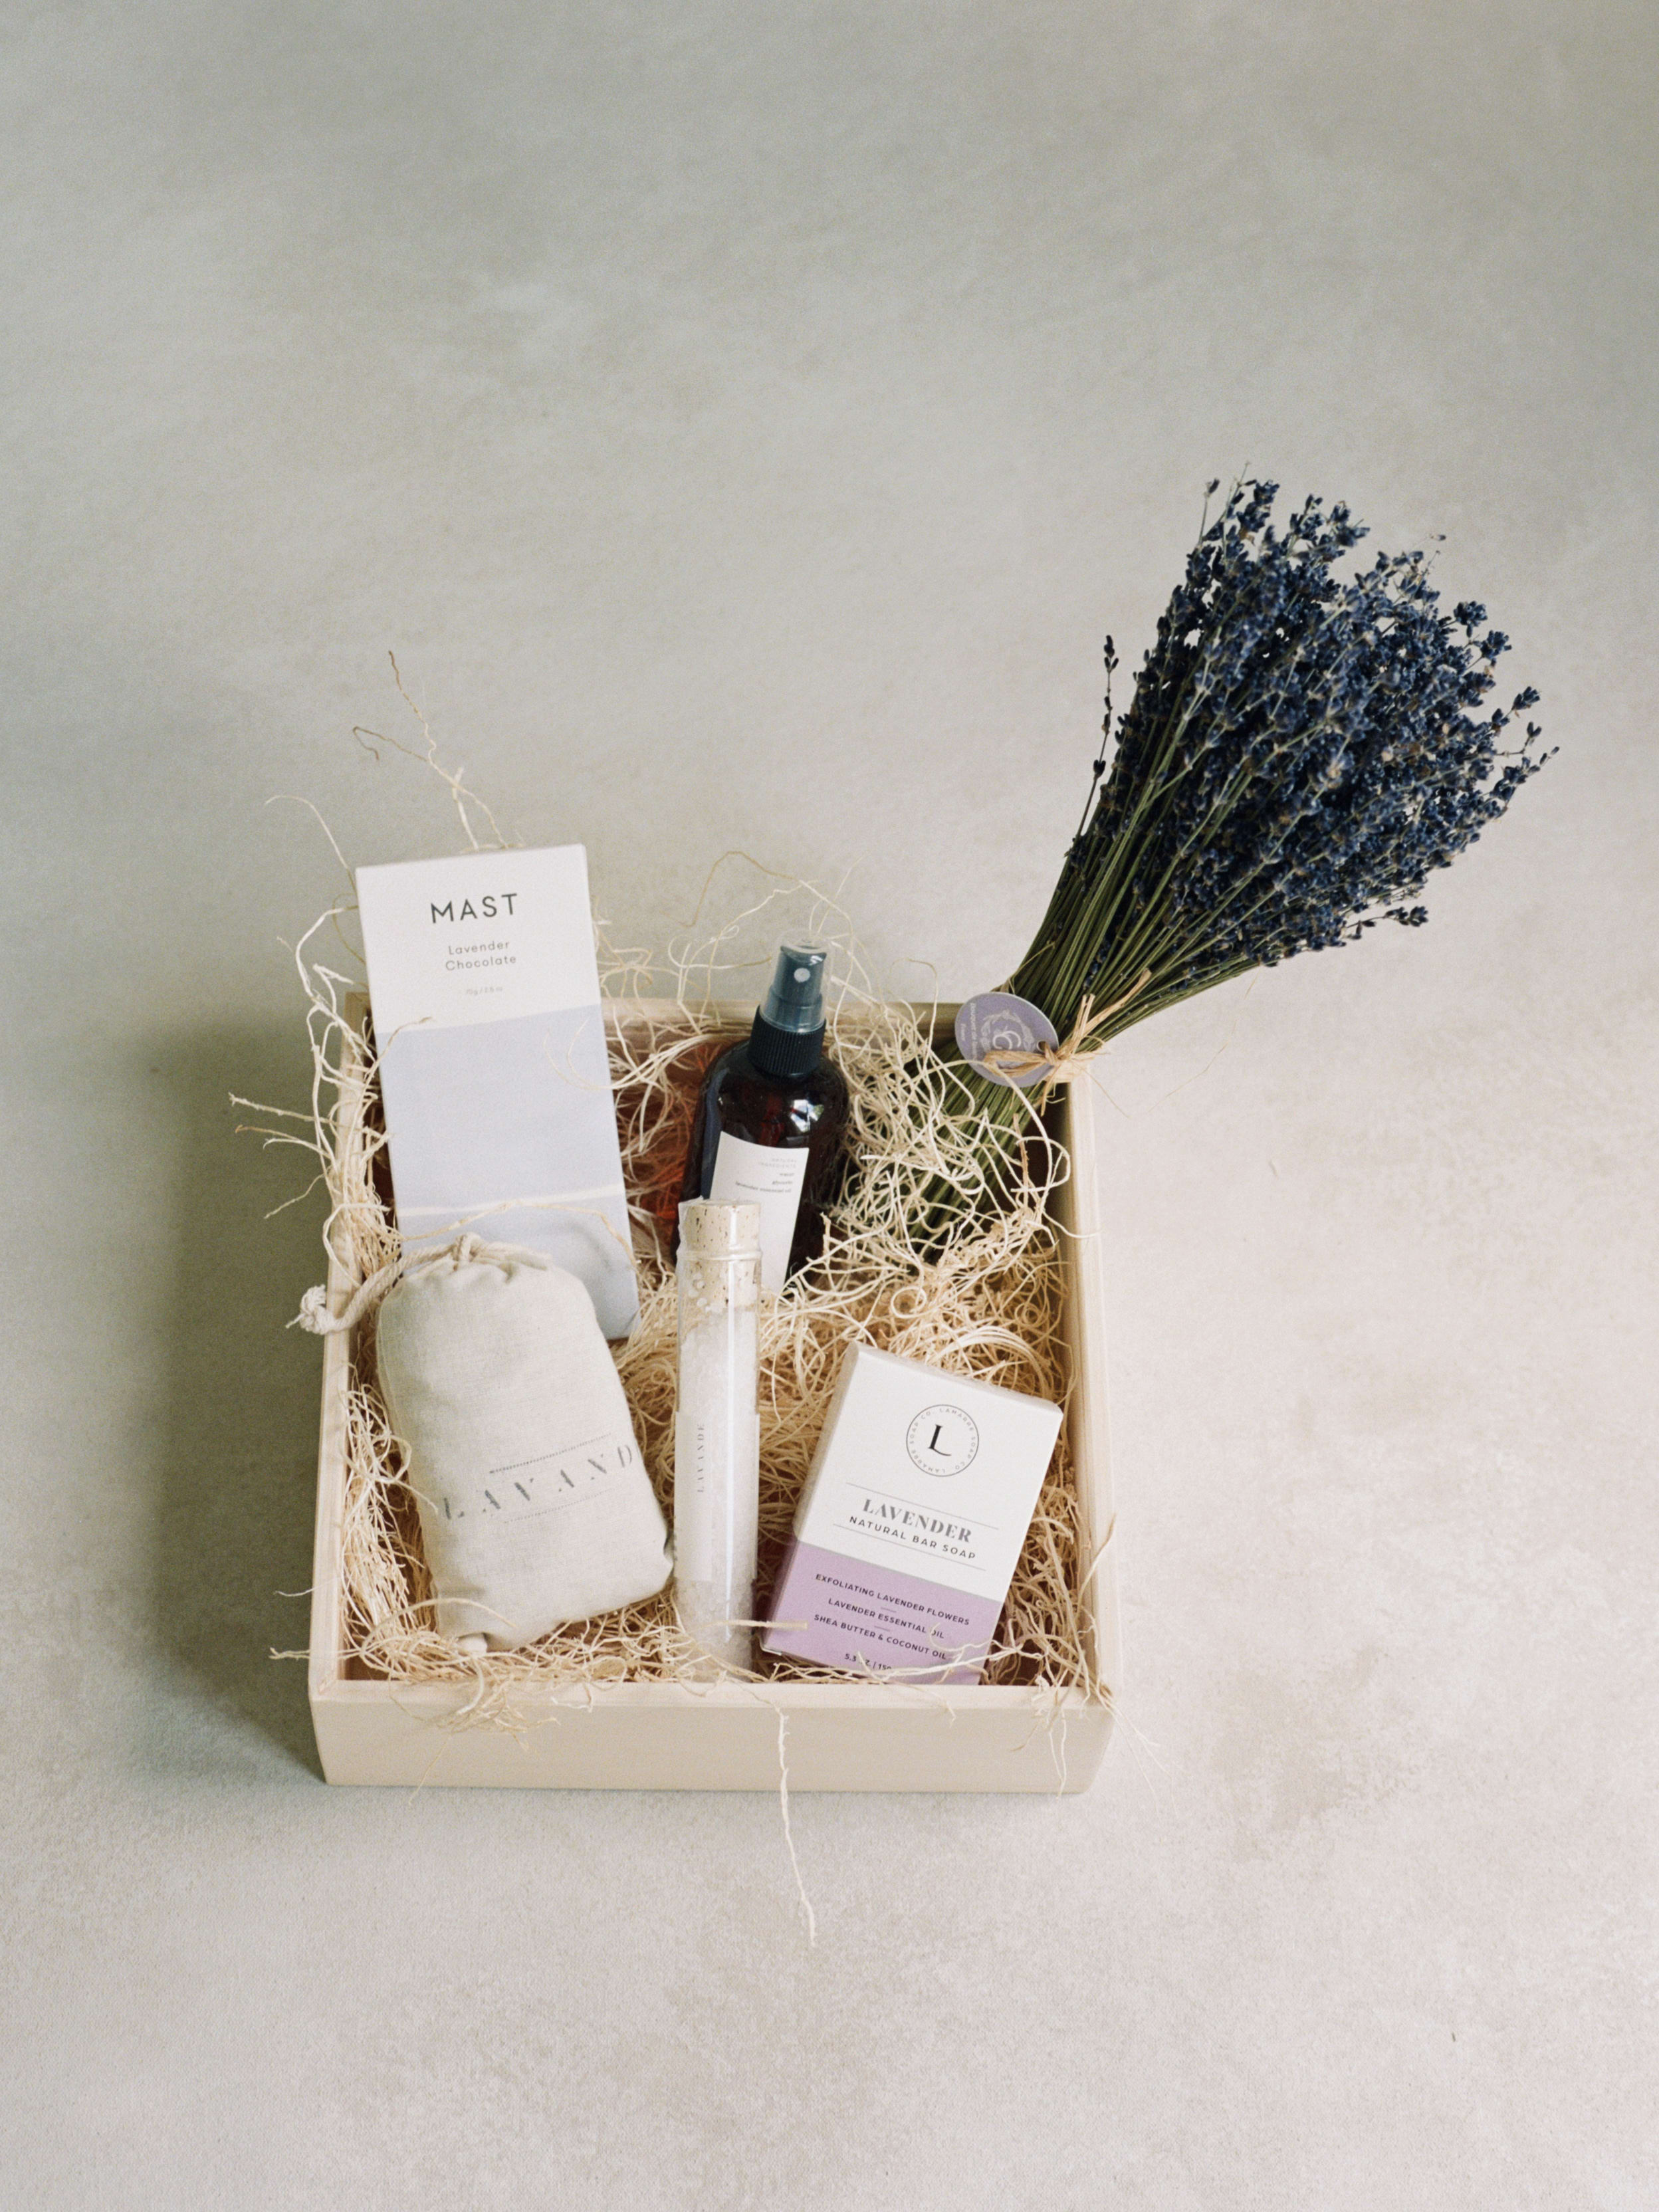 The Lavender Gift Box  - The perfect relaxing gift. A lavender chocolate bar,  lavender bar soap, lavender dried bundle,  lavender sachet, Lavender mosquito spray, and bath salts, all designed in a wooden keepsake box with a handwritten card. 